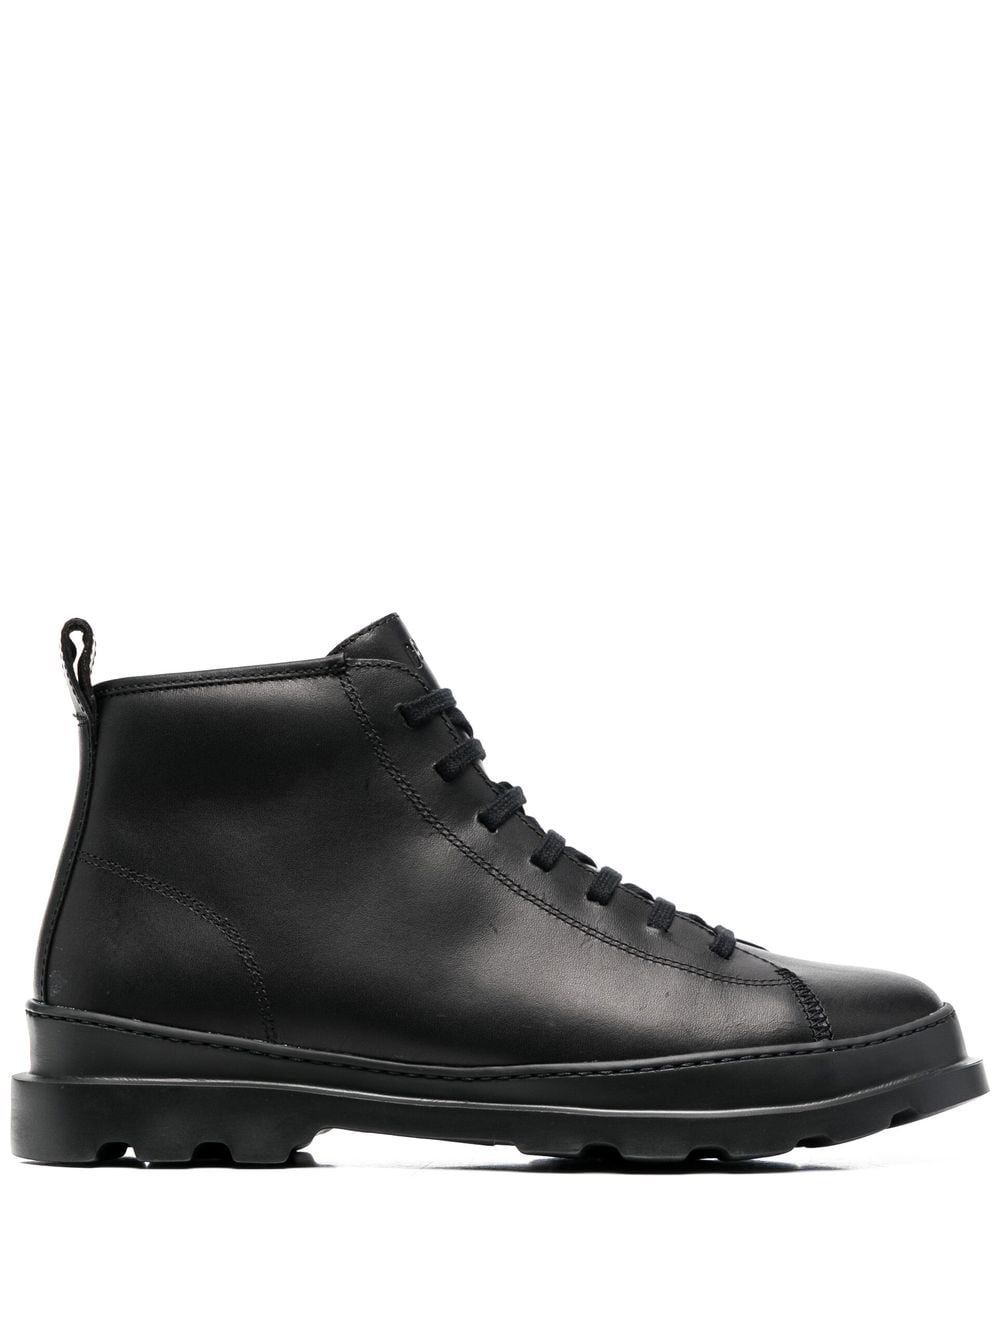 Image 1 of Camper Brutus lace-up boots